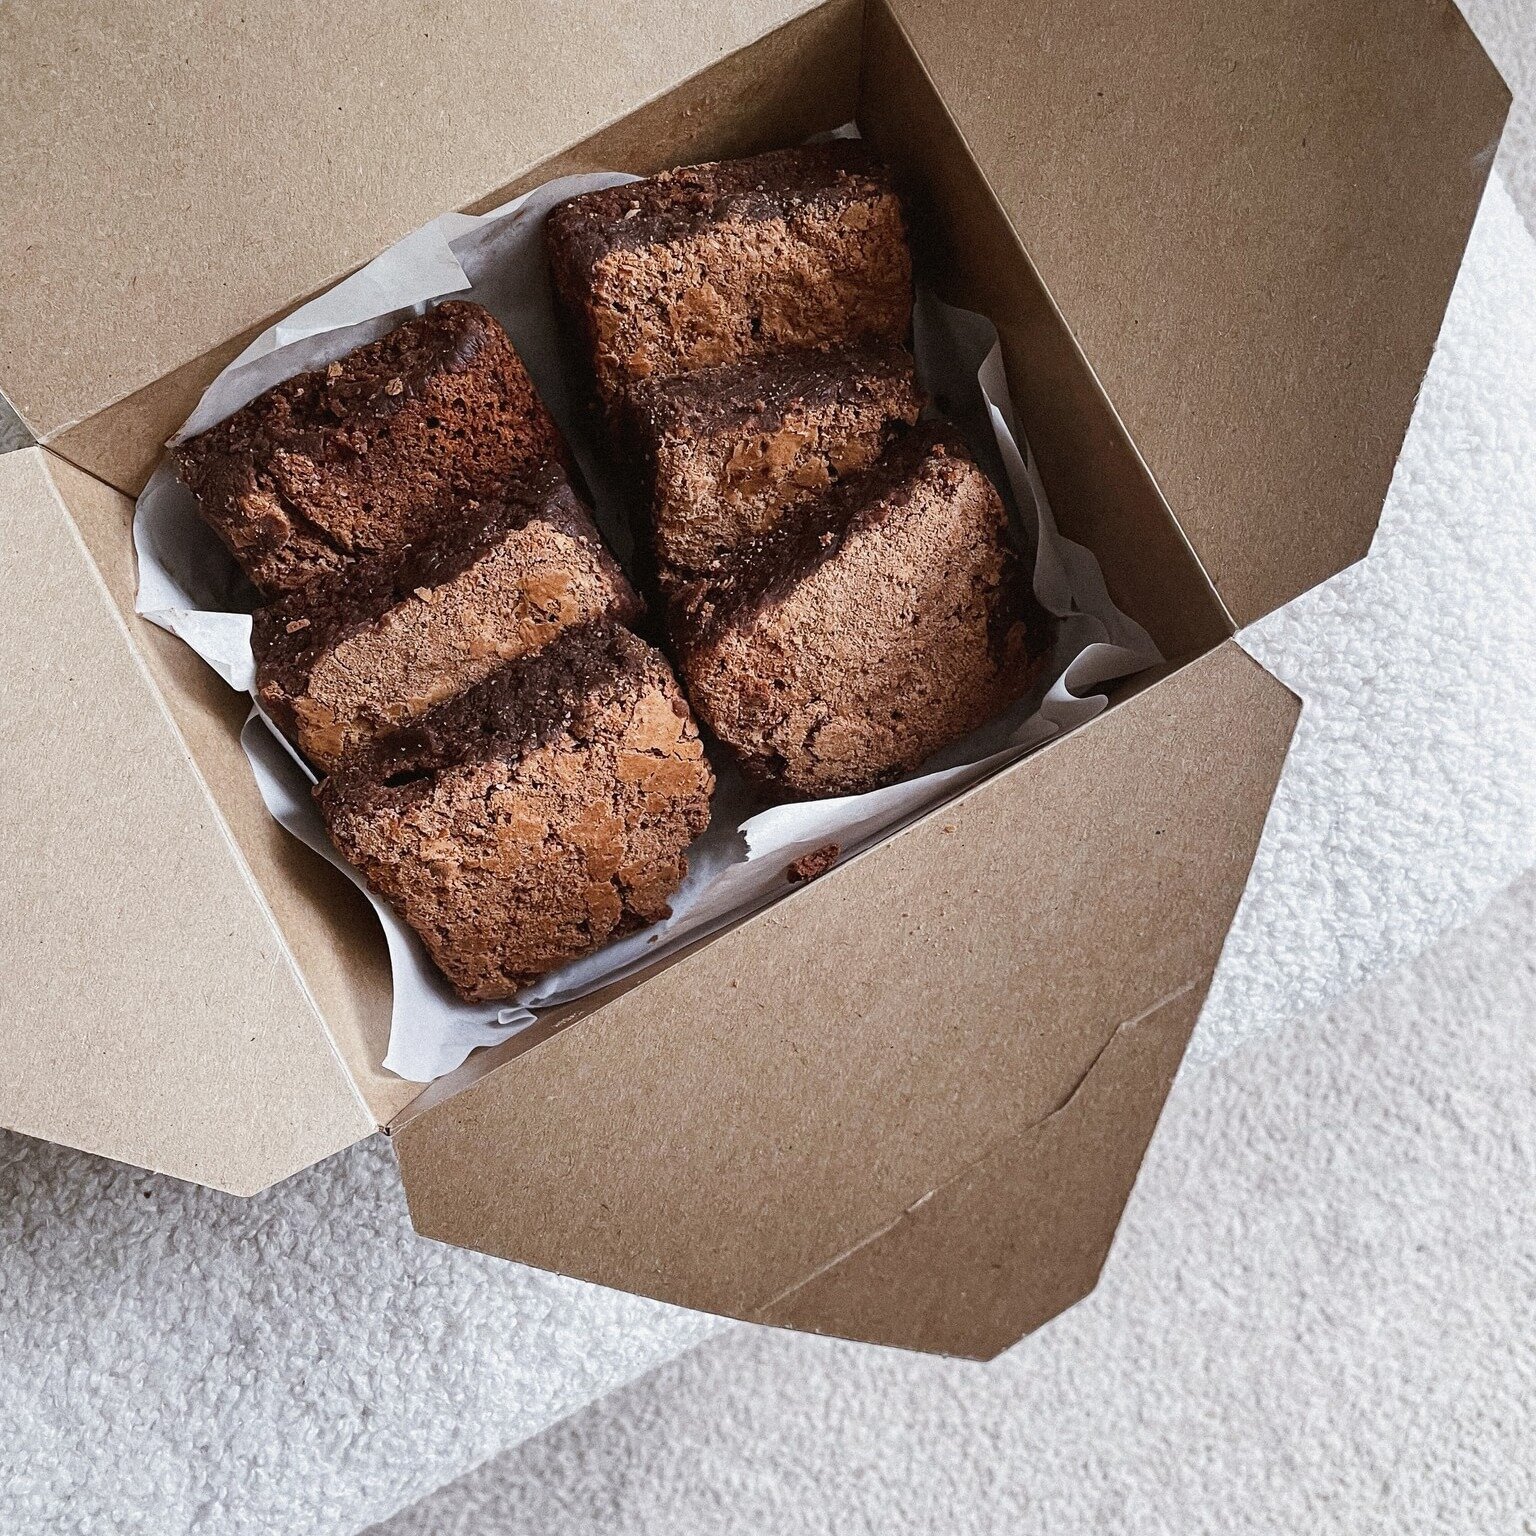 The best way to brighten someones day? 
A box of six insanely good Gluten-Free Chocolate Brownies 💗

FREE delivery (UK Only) - sent via Royal Mail 1st class post. 💌
Available to purchase via our website: www.sevenmile.co.uk

.
.
.
.
.
#Brownies #Ve